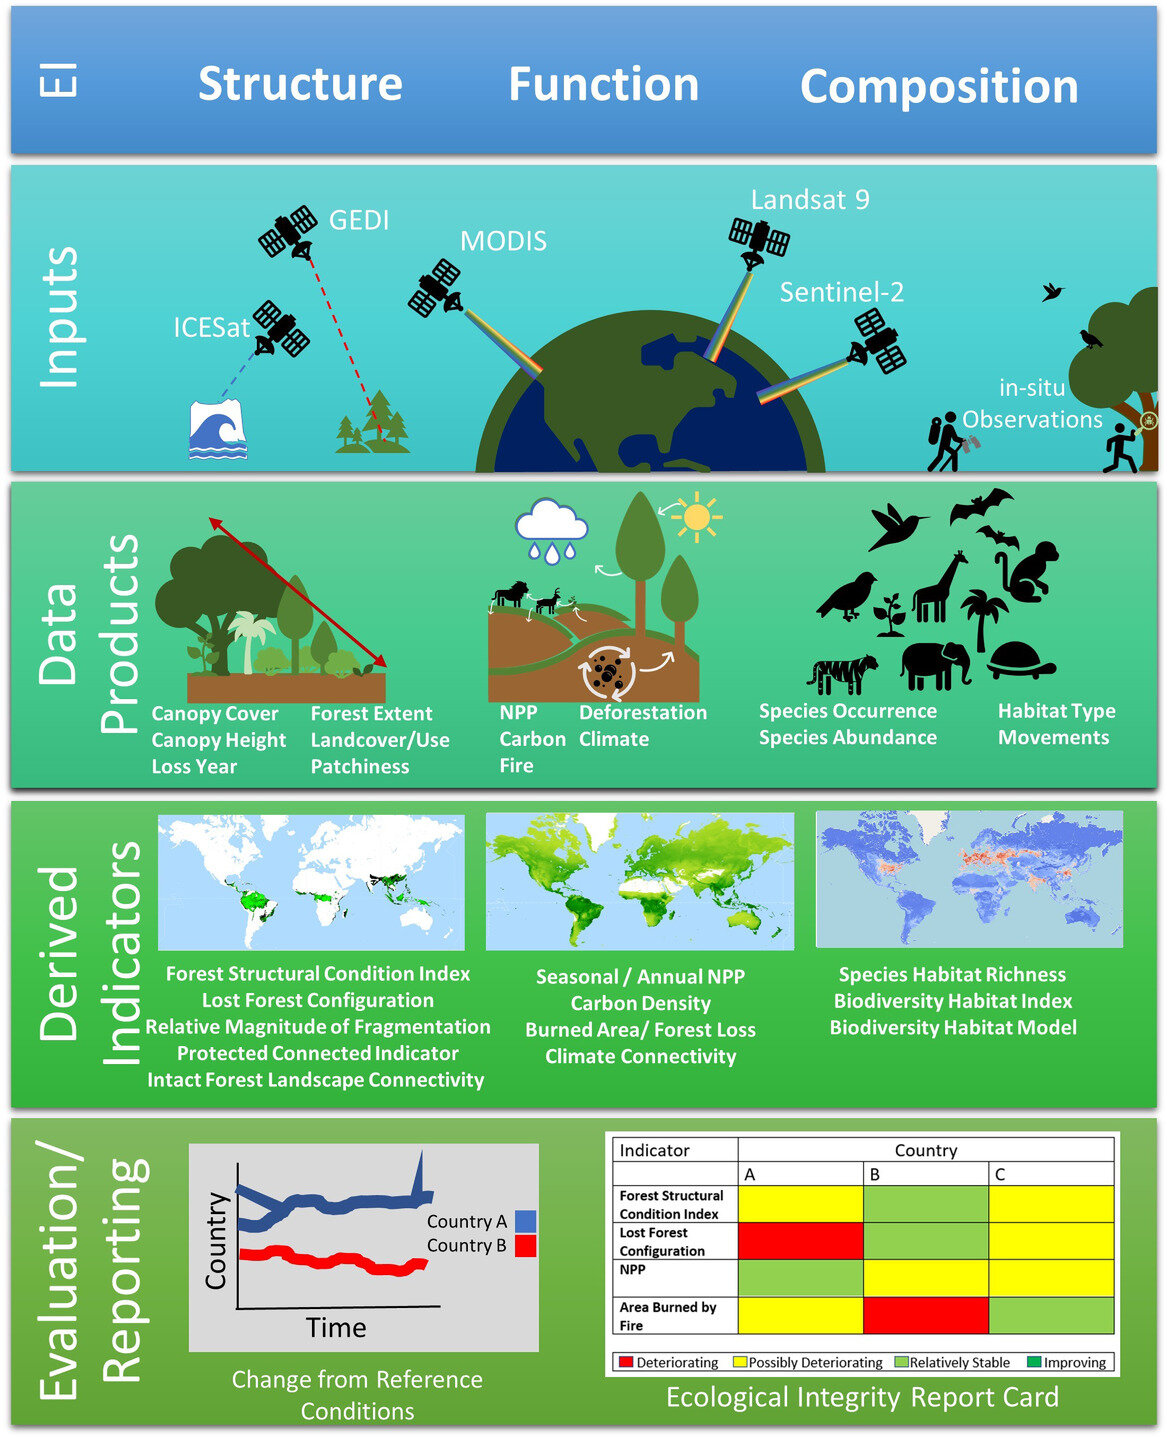 ecologists-outline-methods-for-reaching-global-biodiversity-targets